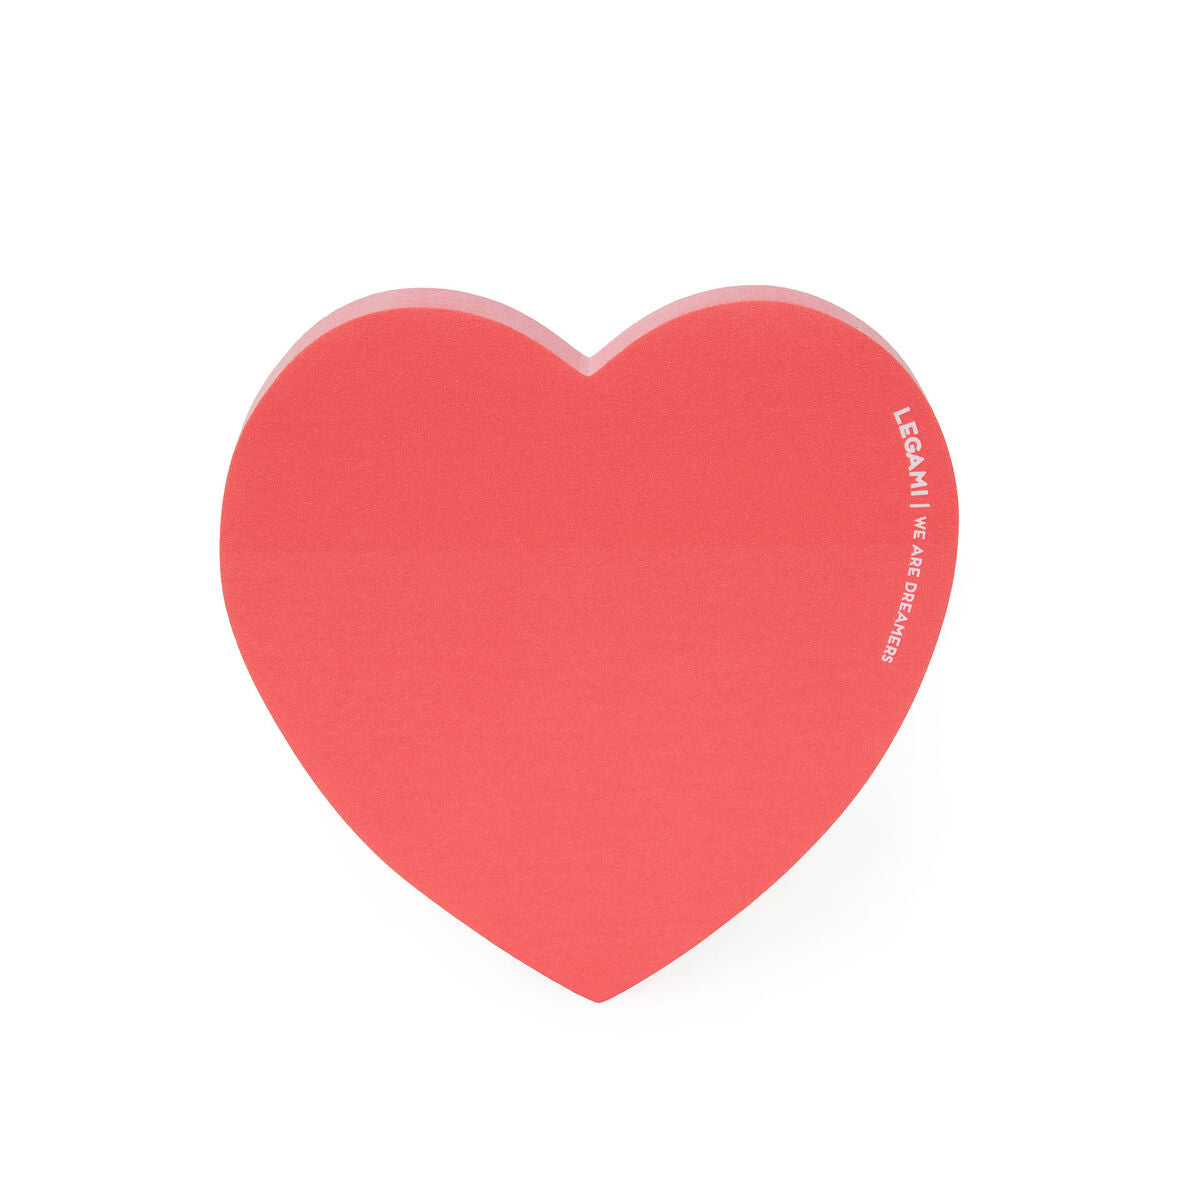 Back to School | Legami Adhesive Notepad Heart by Weirs of Baggot St